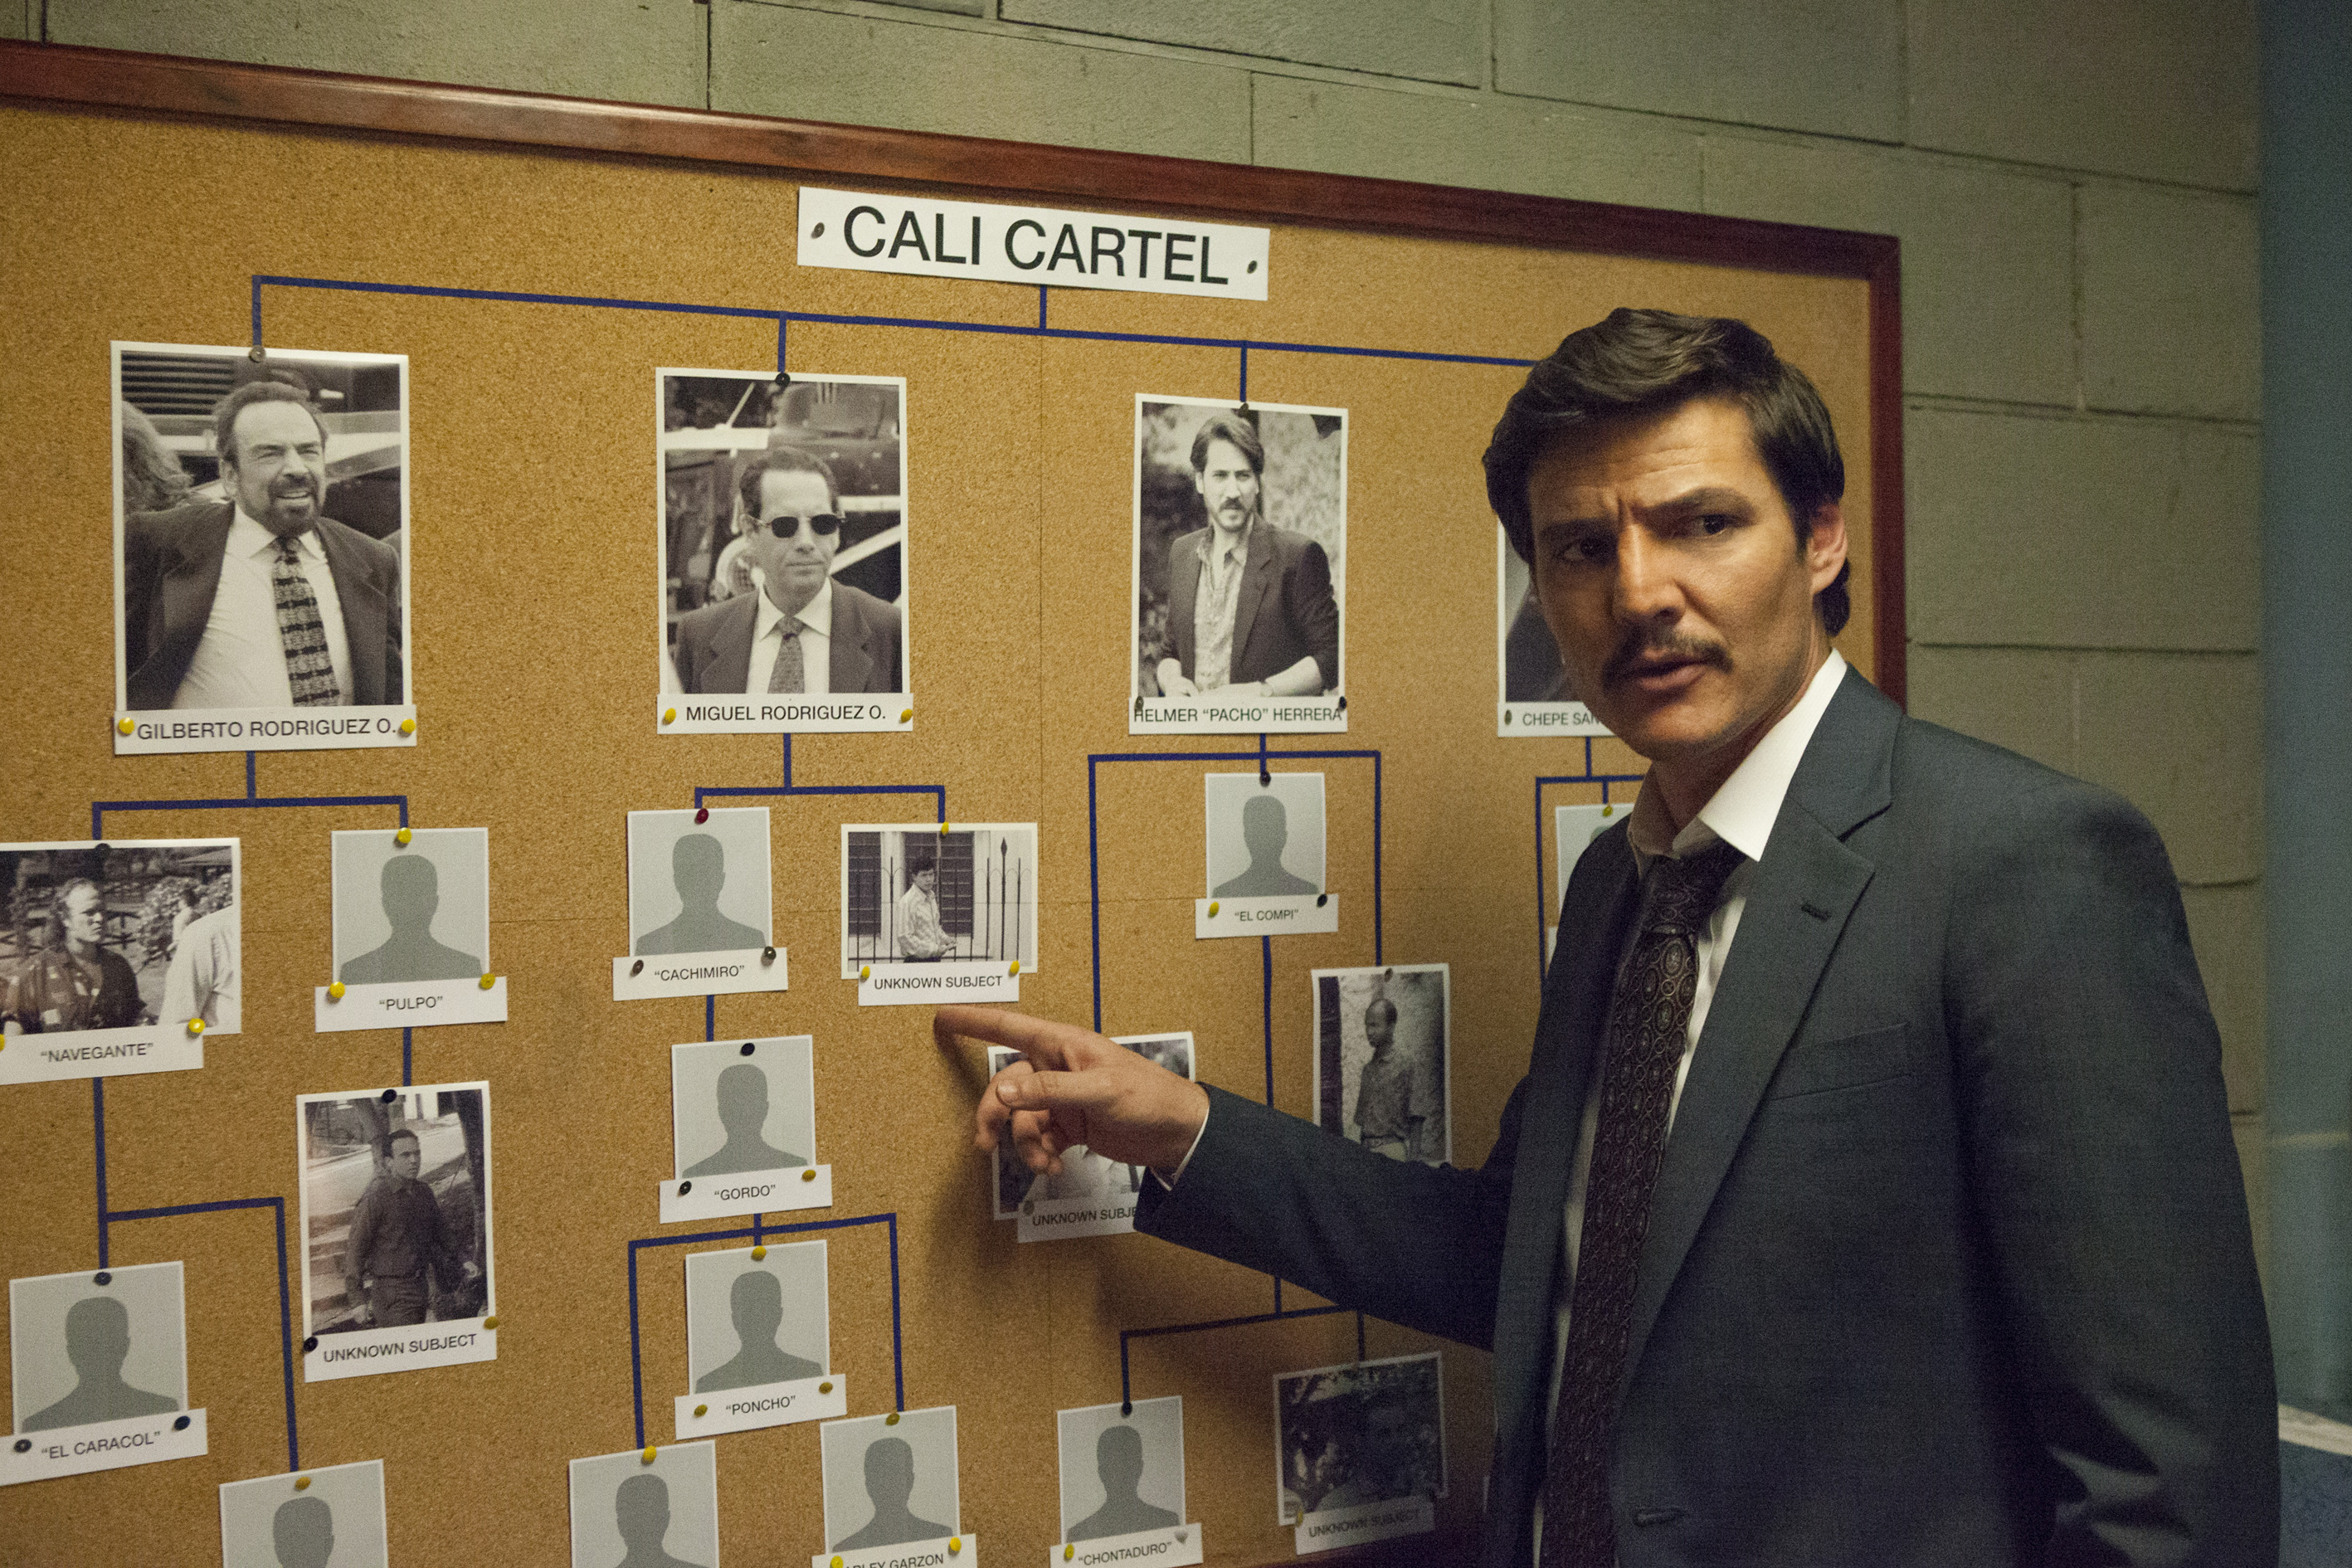 An actor playing a detective on the Netflix show “Narcos” stands in front of a corkboard covered in a relationship tree of photos labeled “Cali Cartel.” 